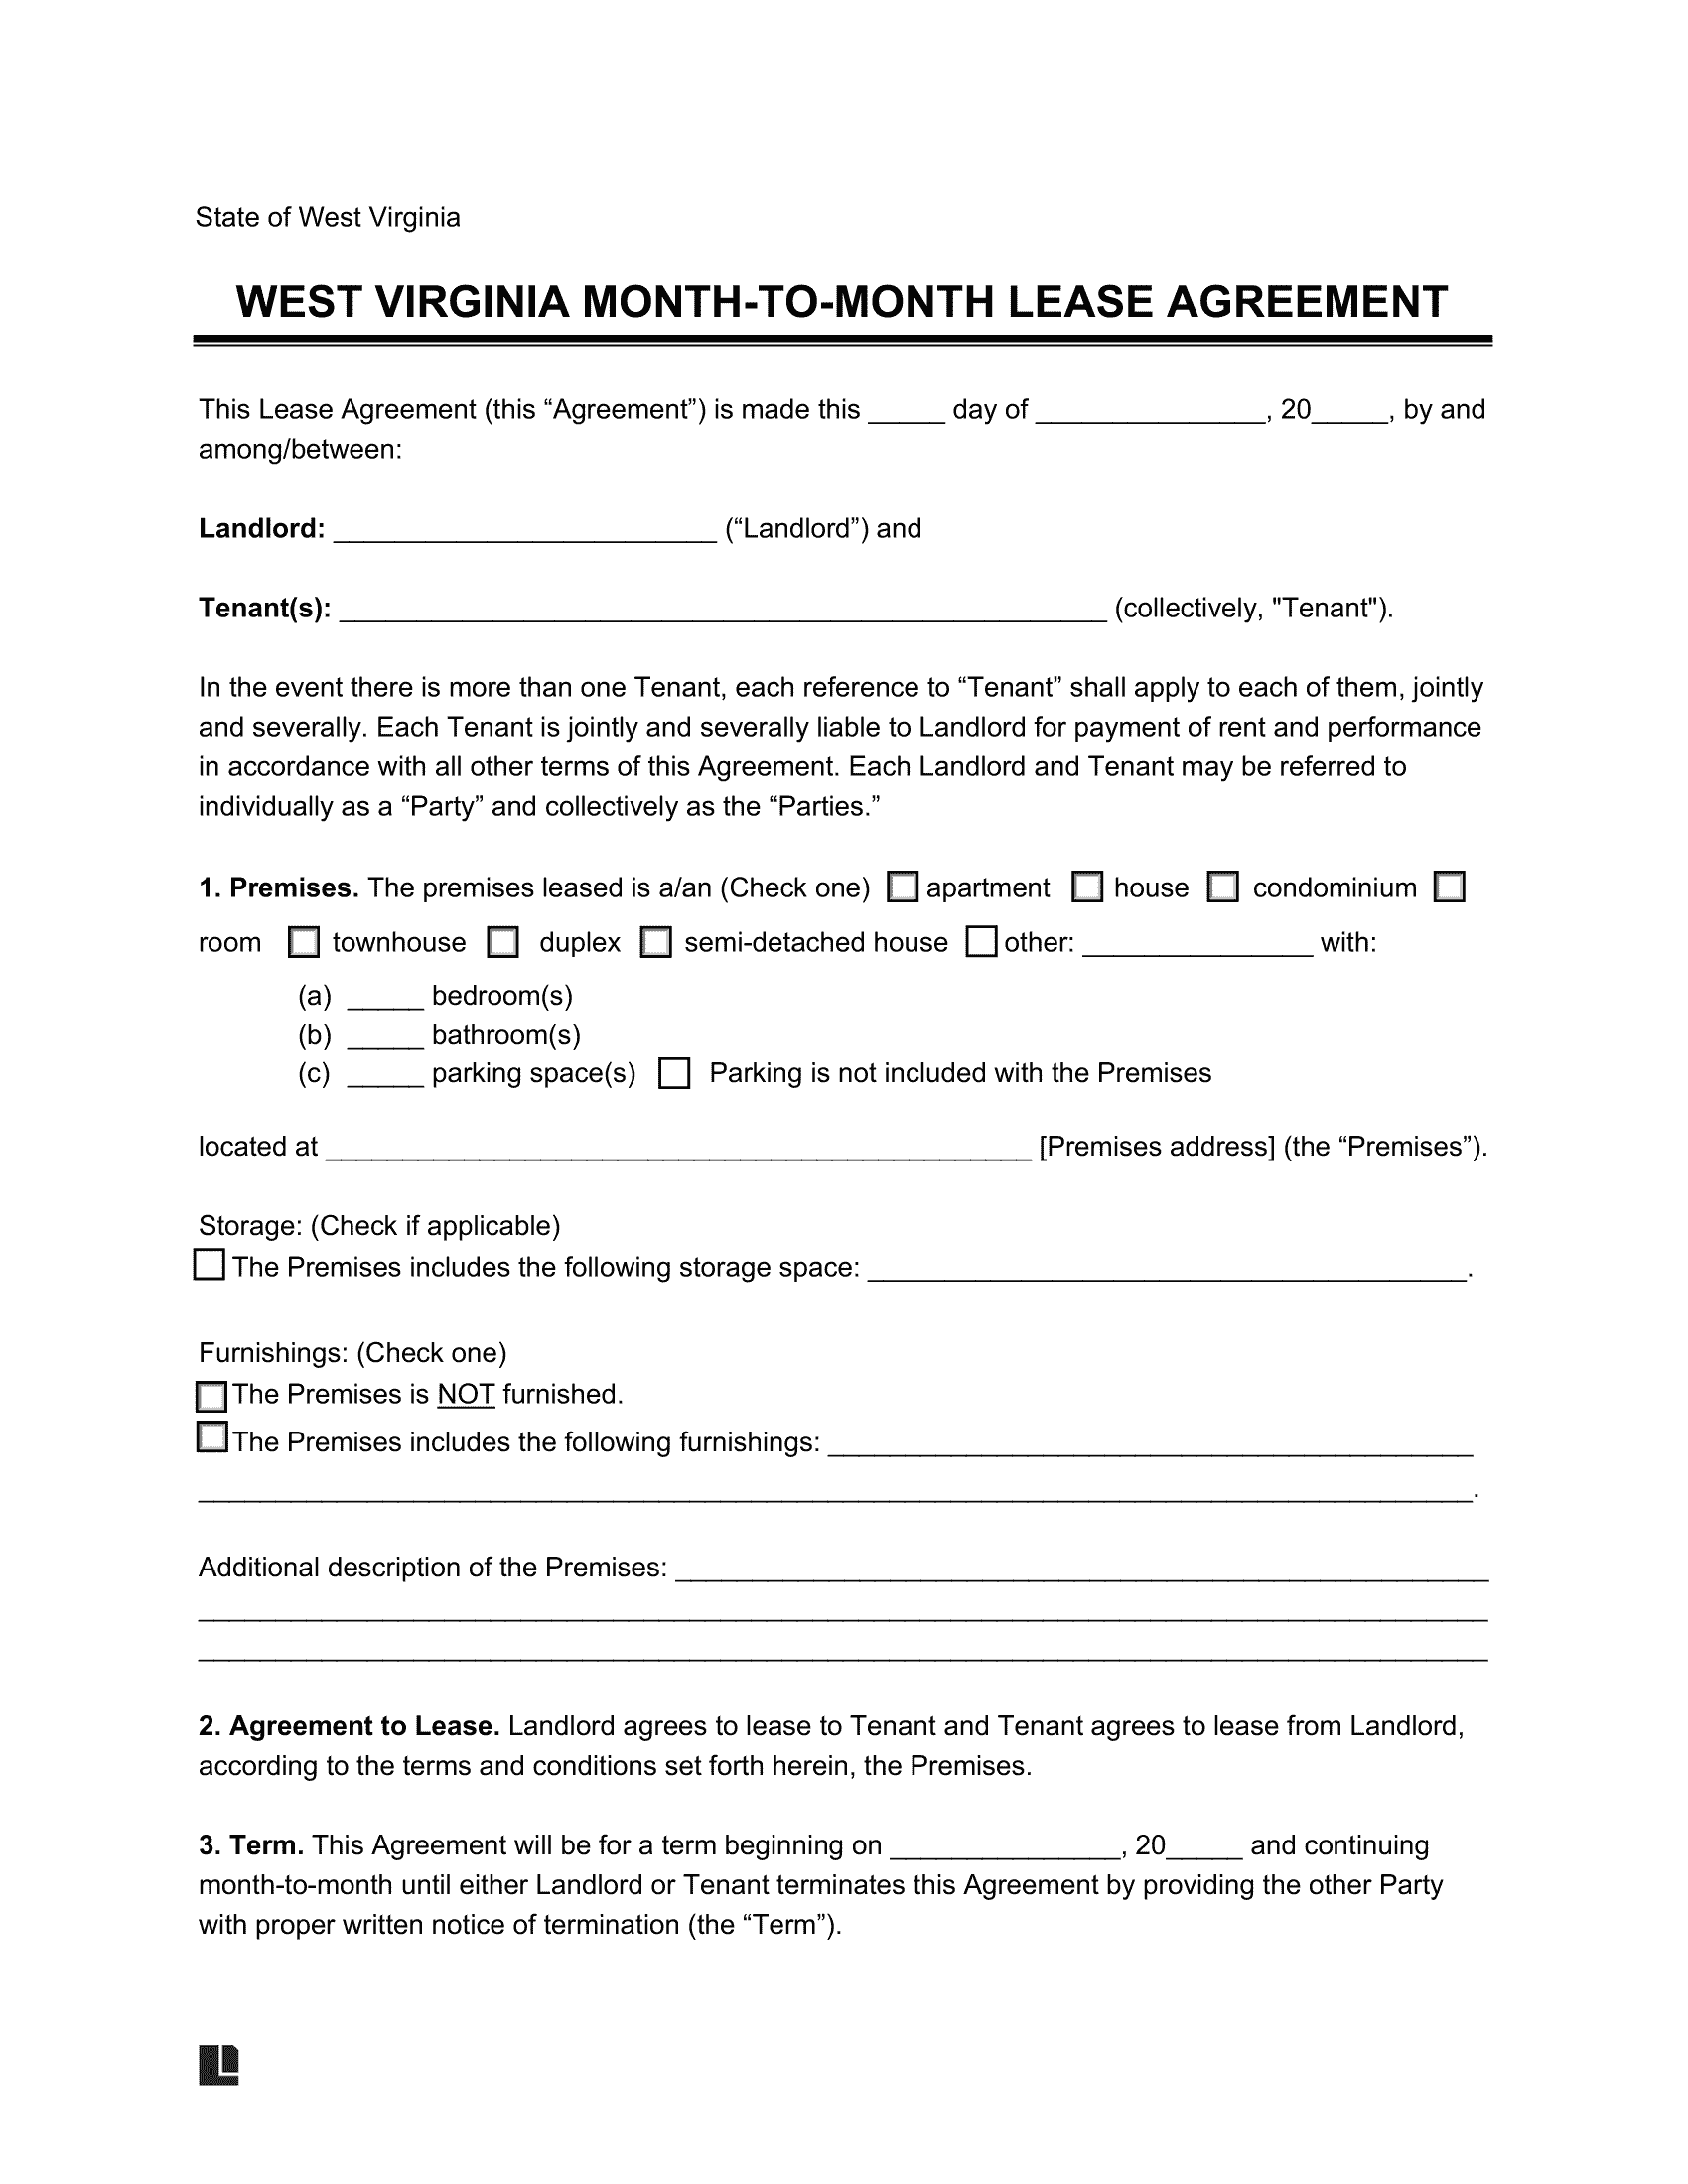 West Virginia Month-to-Month Rental Agreement